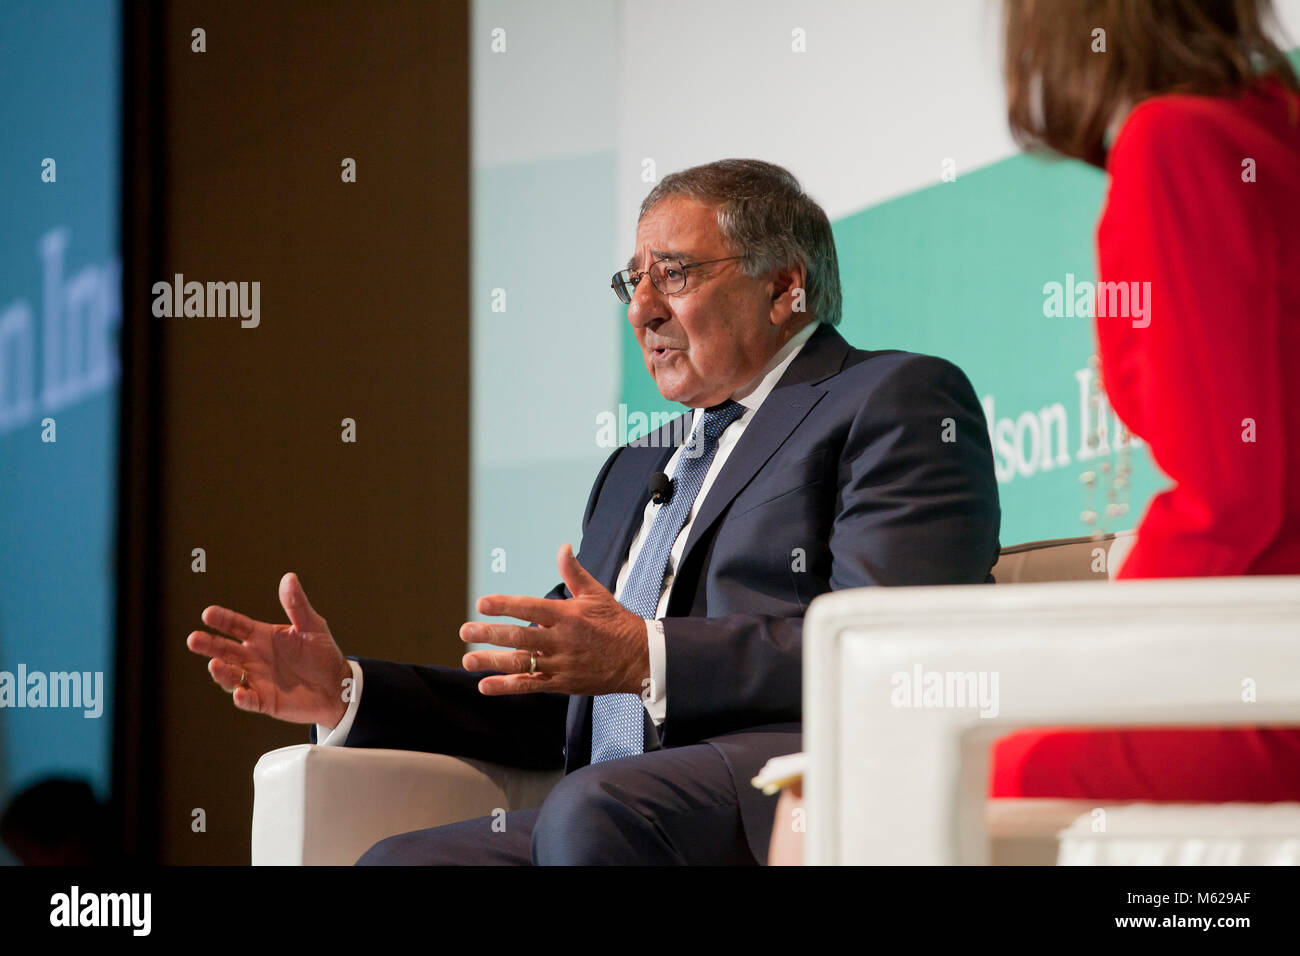 October 23, 2017, Washington, DC USA - Leon Panetta, former Secretary of Defense and CIA, in an interview with Washington Post editor, Lally Weymouth Stock Photo